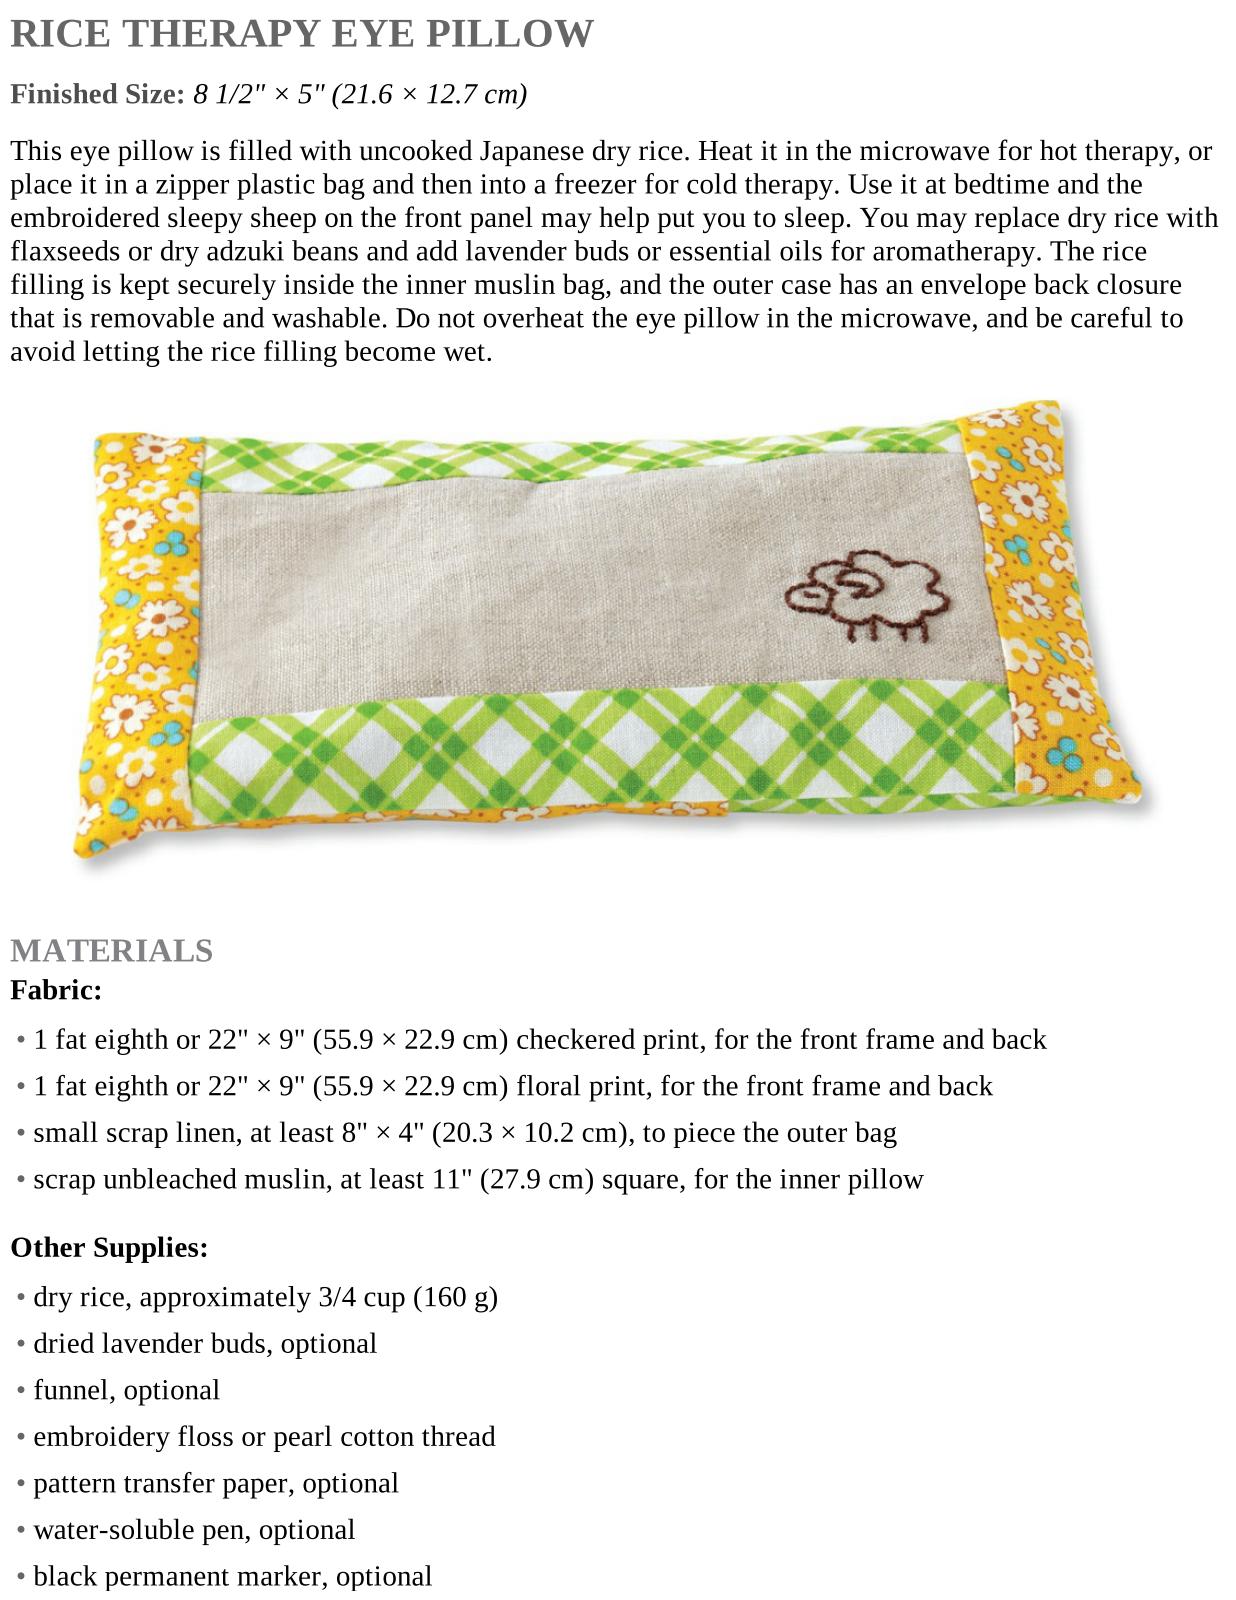 Rice Therapy Eye Pillow